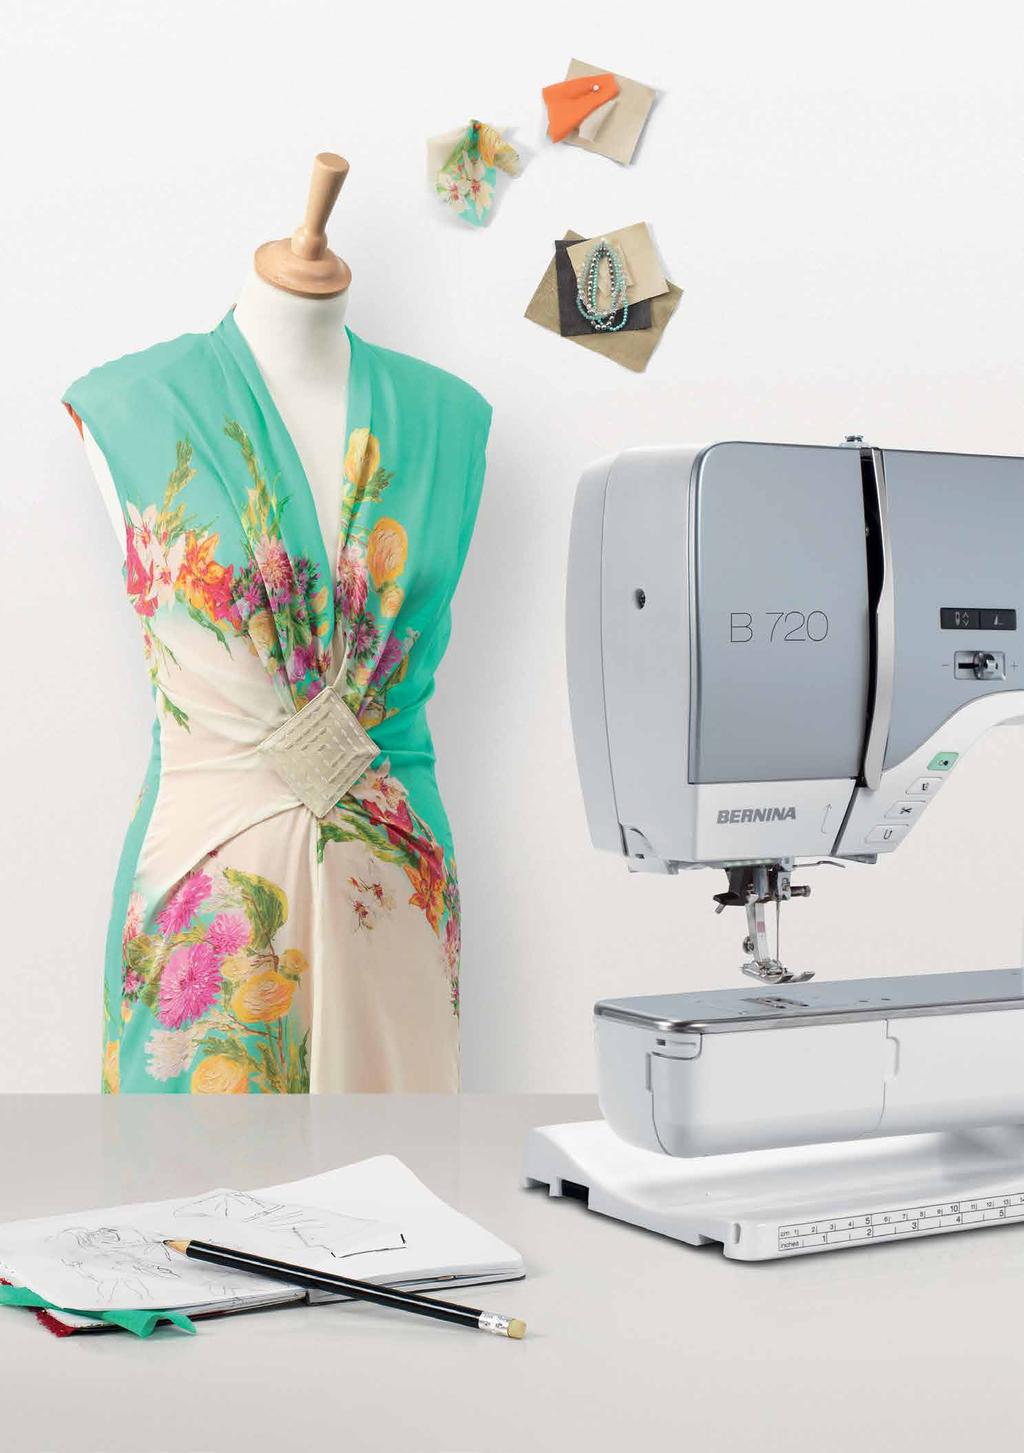 Slide speed control Sewing speed up to 1,000 stitches per minute Direct-selection buttons: Start / stop button Raise and lower presser foot Automatic thread cutter Reverse sewing The BERNINA Hook